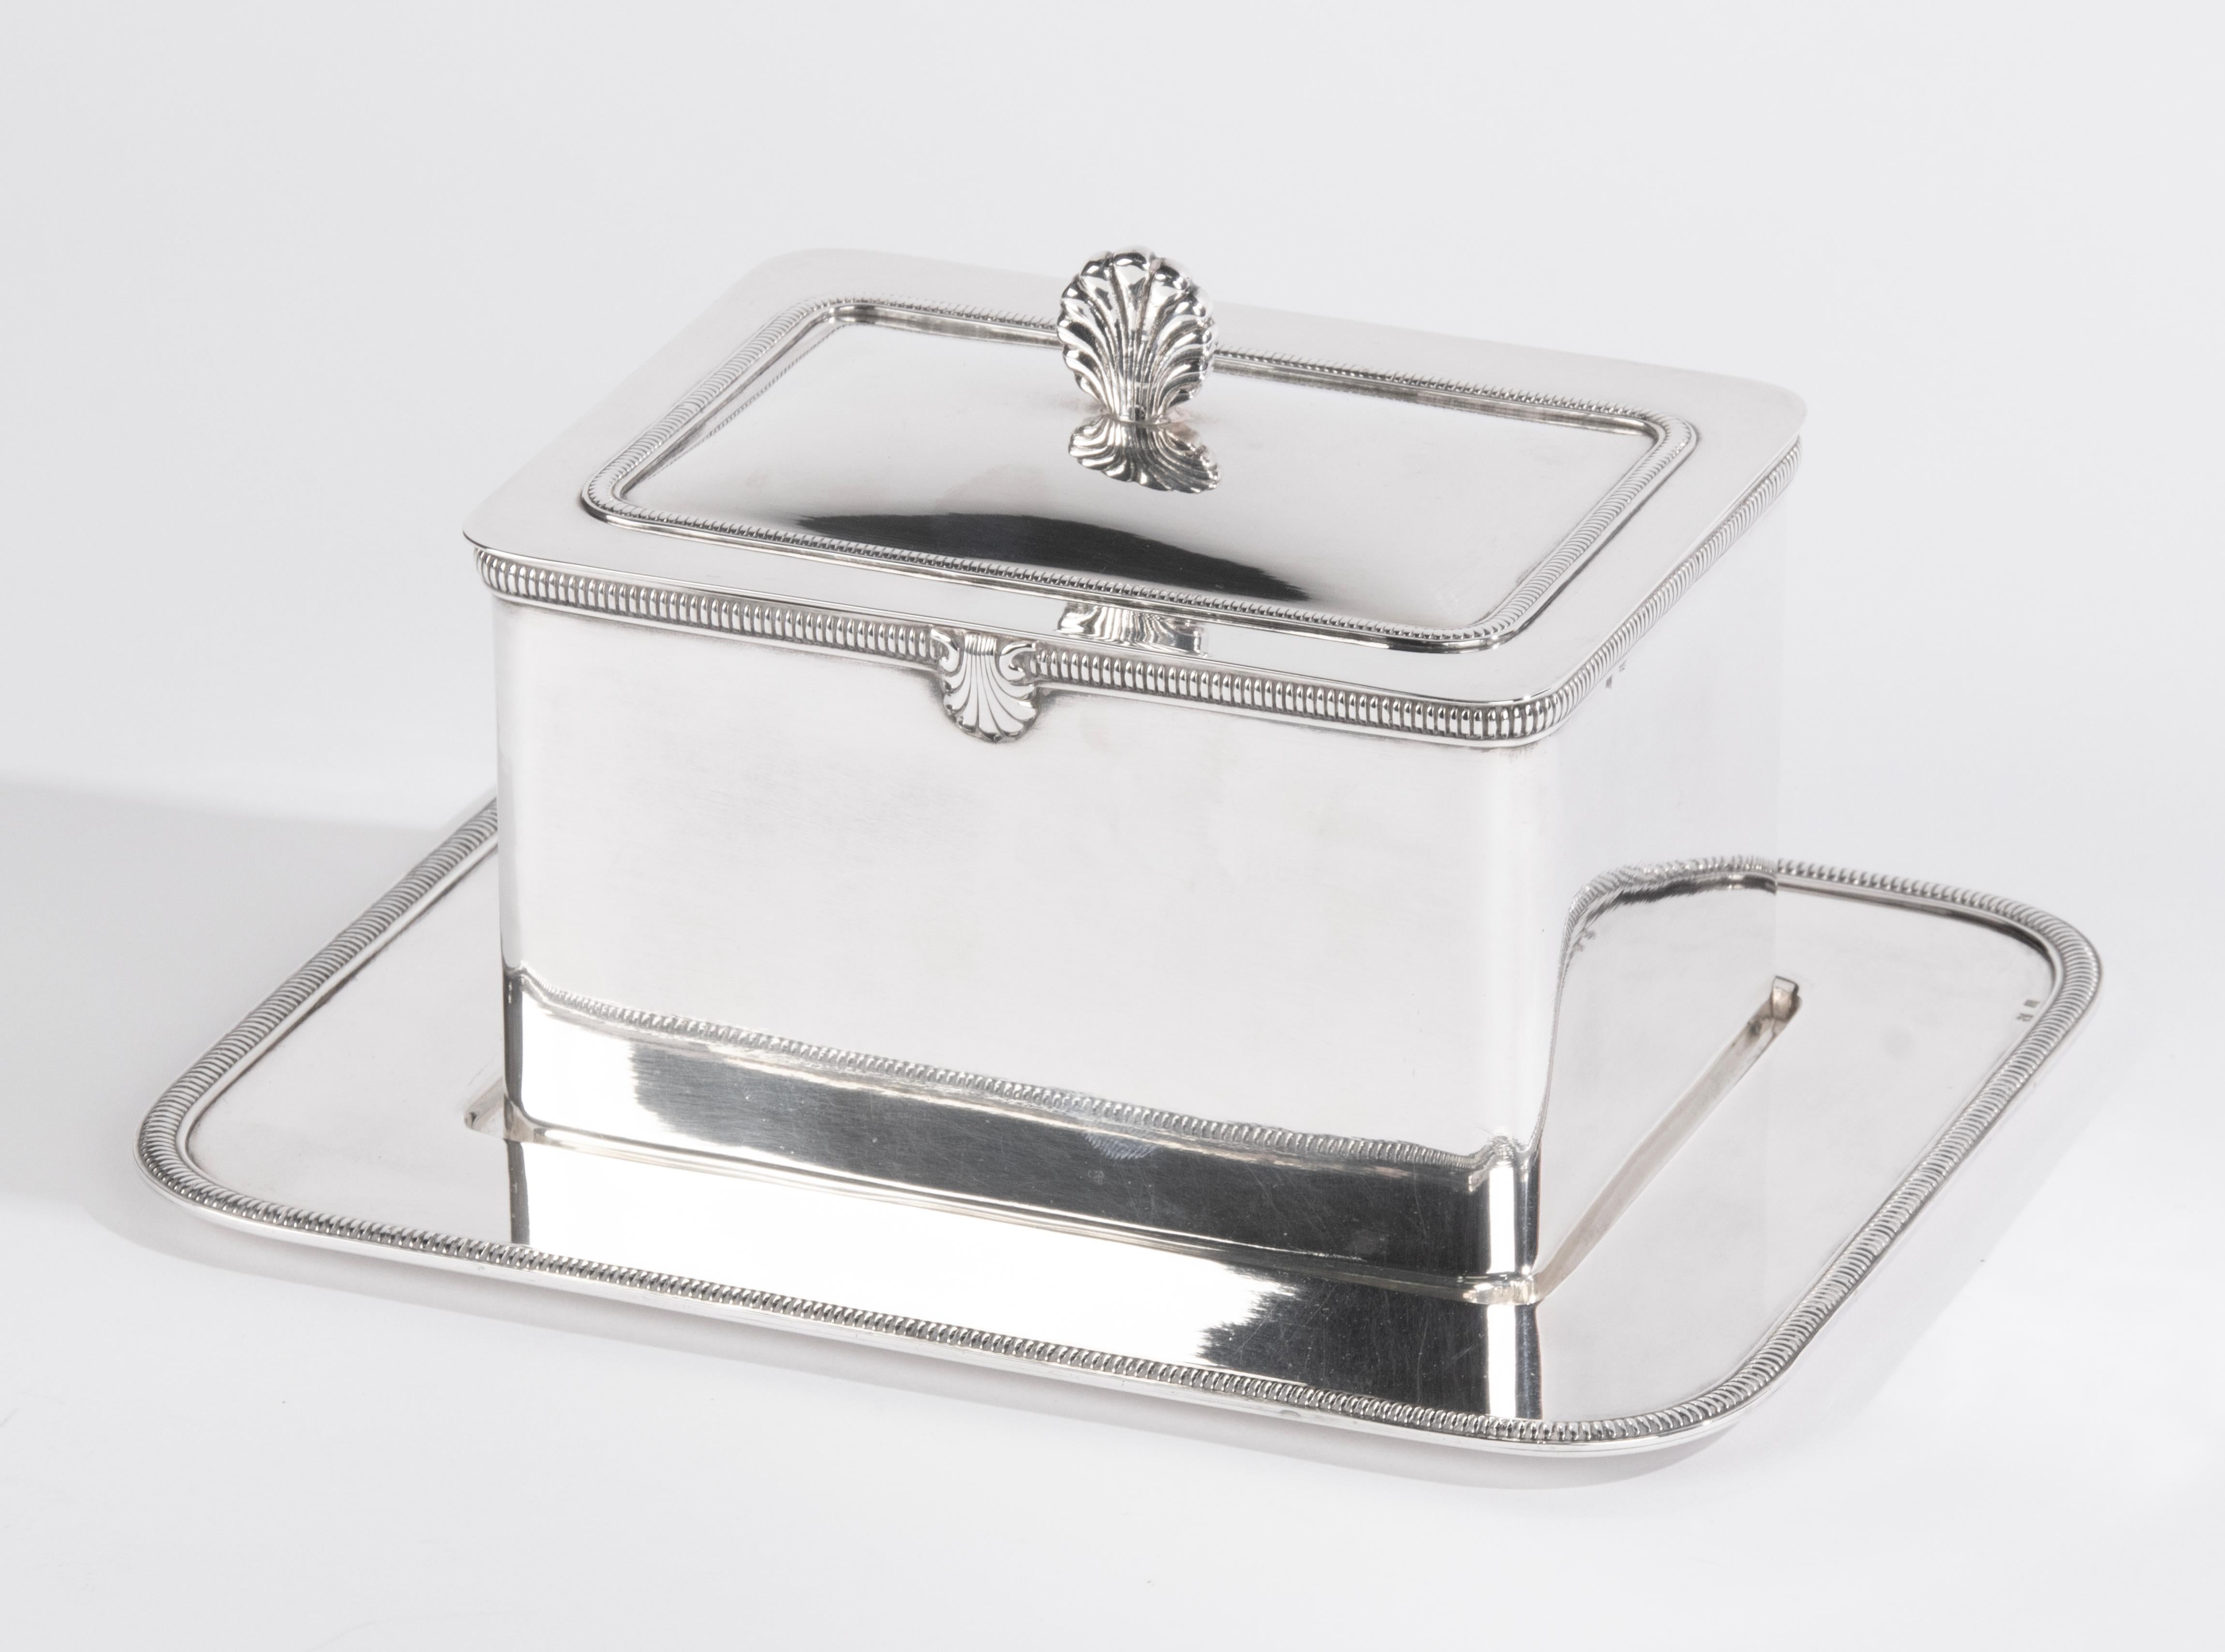 Elegant Mid 20th Century Silver Plated Biscuit Barrel on Tray  For Sale 6